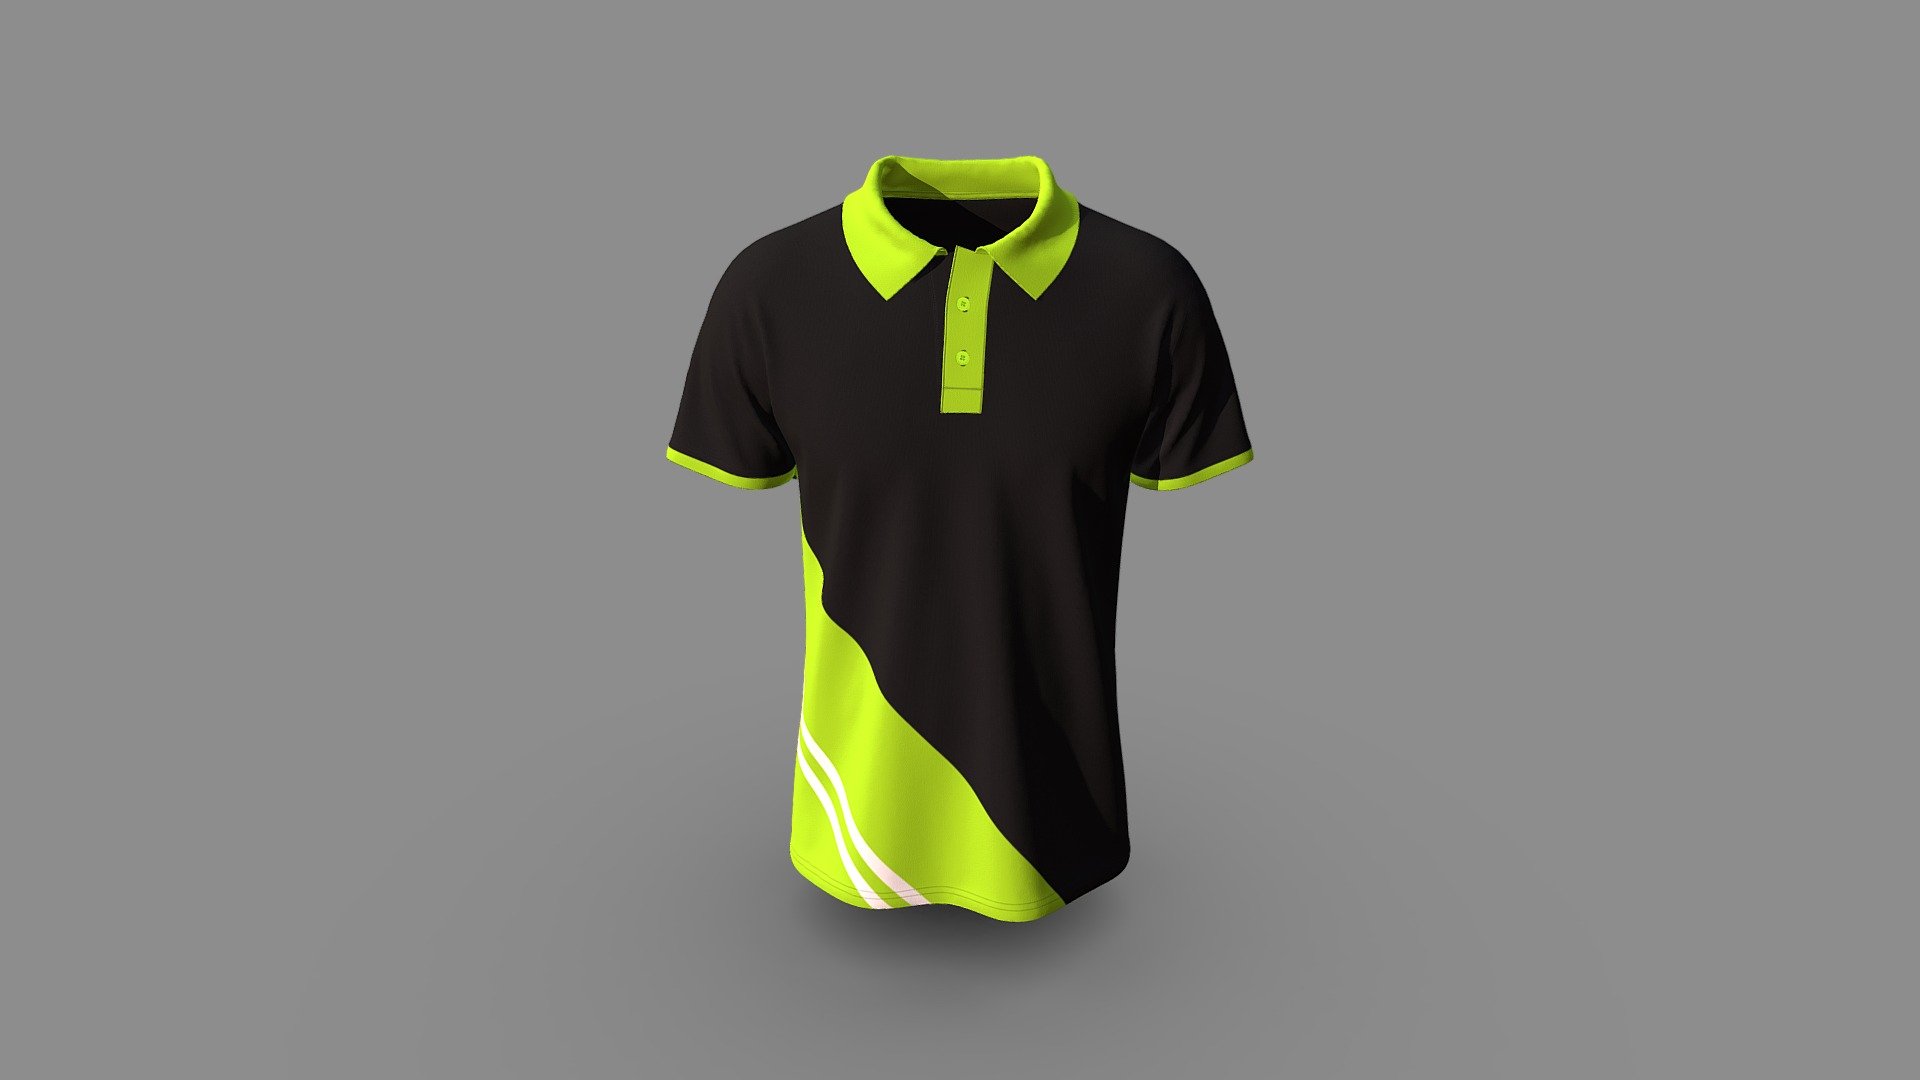 Cloth Title = Knit Fashion Polo 

SKU = DG100201 

Category = Men 

Product Type = Polo 

Cloth Length = Regular 

Body Fit = Regular Fit 

Occasion = Casual  

Sleeve Style = Short Sleeve 


Our Services:

3D Apparel Design.

OBJ,FBX,GLTF Making with High/Low Poly.

Fabric Digitalization.

Mockup making.

3D Teck Pack.

Pattern Making.

2D Illustration.

Cloth Animation and 360 Spin Video.


Contact us:- 

Email: info@digitalfashionwear.com 

Website: https://digitalfashionwear.com 


We designed all the types of cloth specially focused on product visualization, e-commerce, fitting, and production. 

We will design: 

T-shirts 

Polo shirts 

Hoodies 

Sweatshirt 

Jackets 

Shirts 

TankTops 

Trousers 

Bras 

Underwear 

Blazer 

Aprons 

Leggings 

and All Fashion items. 





Our goal is to make sure what we provide you, meets your demand 3d model